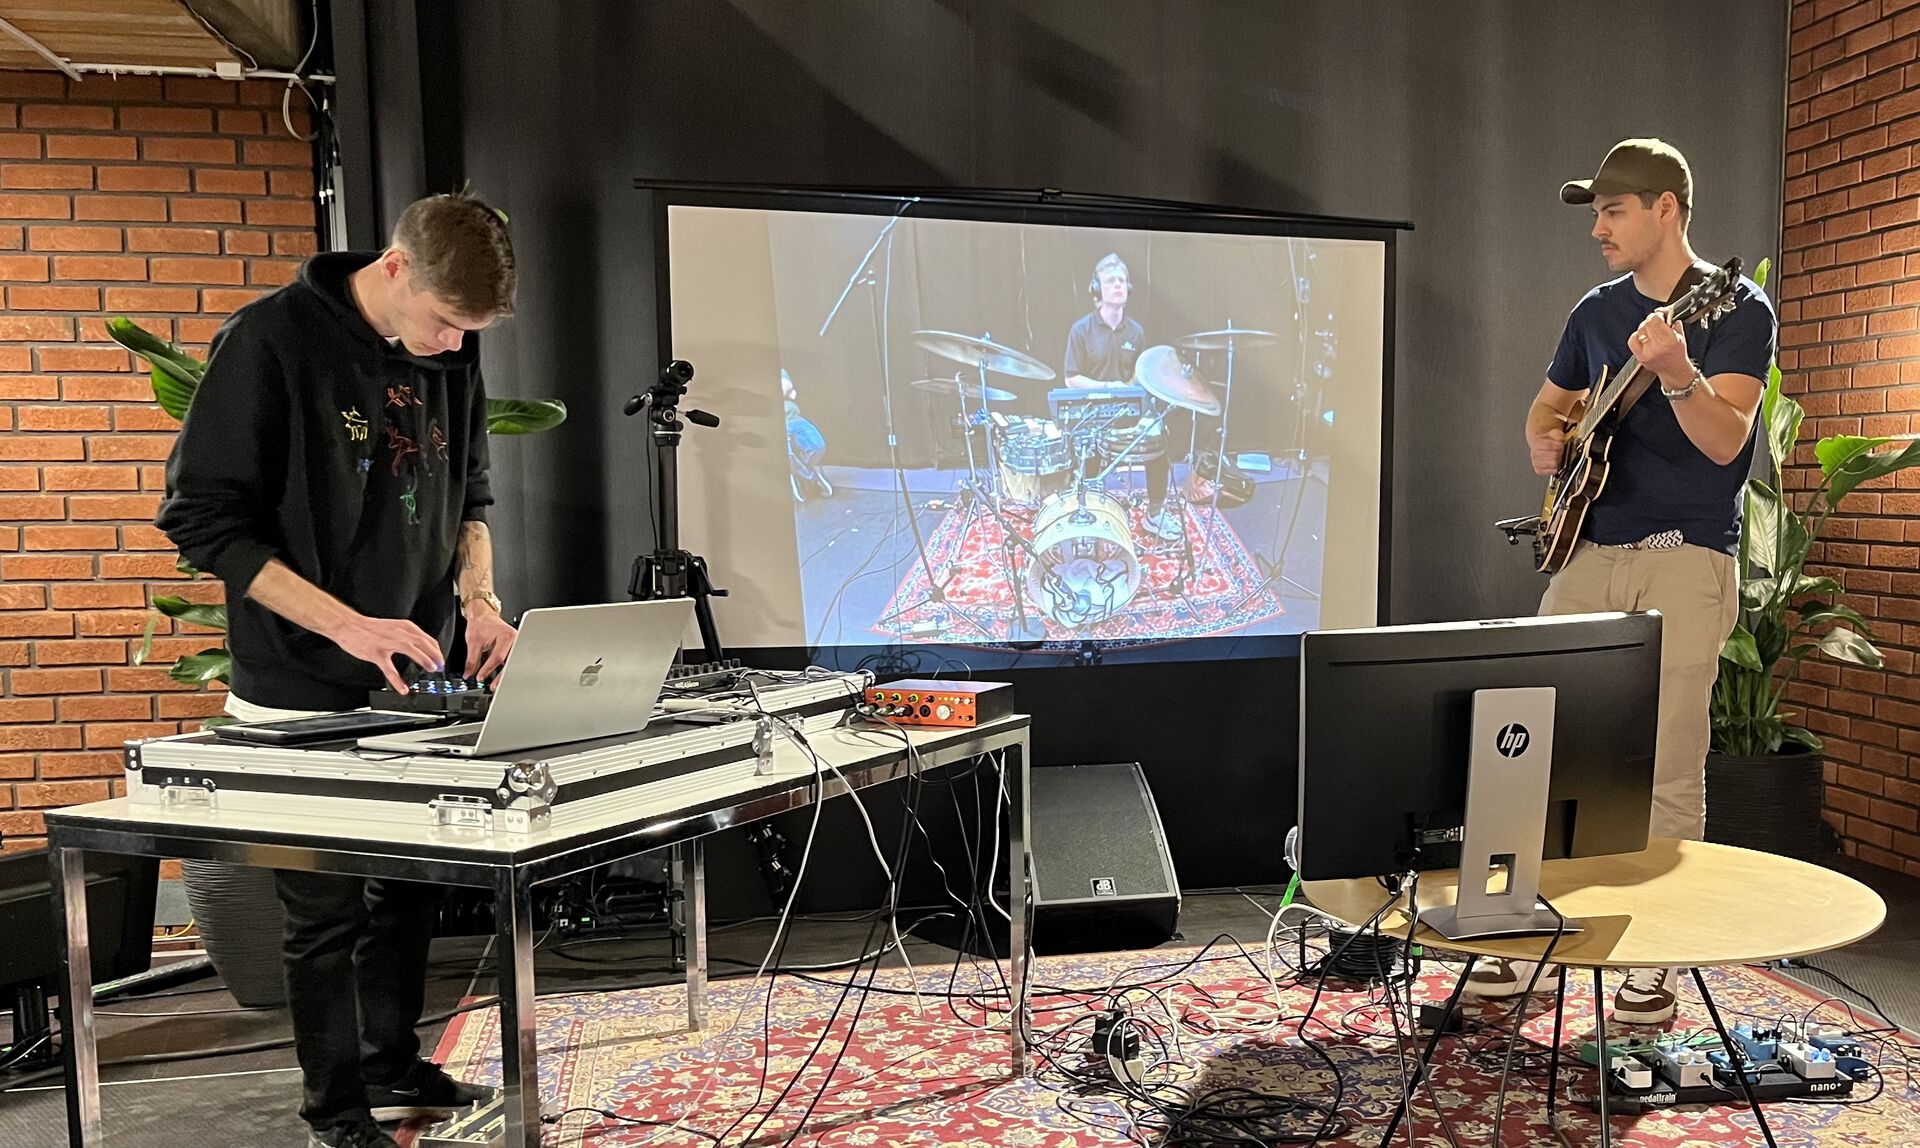 Documenting Networked Music Performances: Tips, Tricks and Best Practices